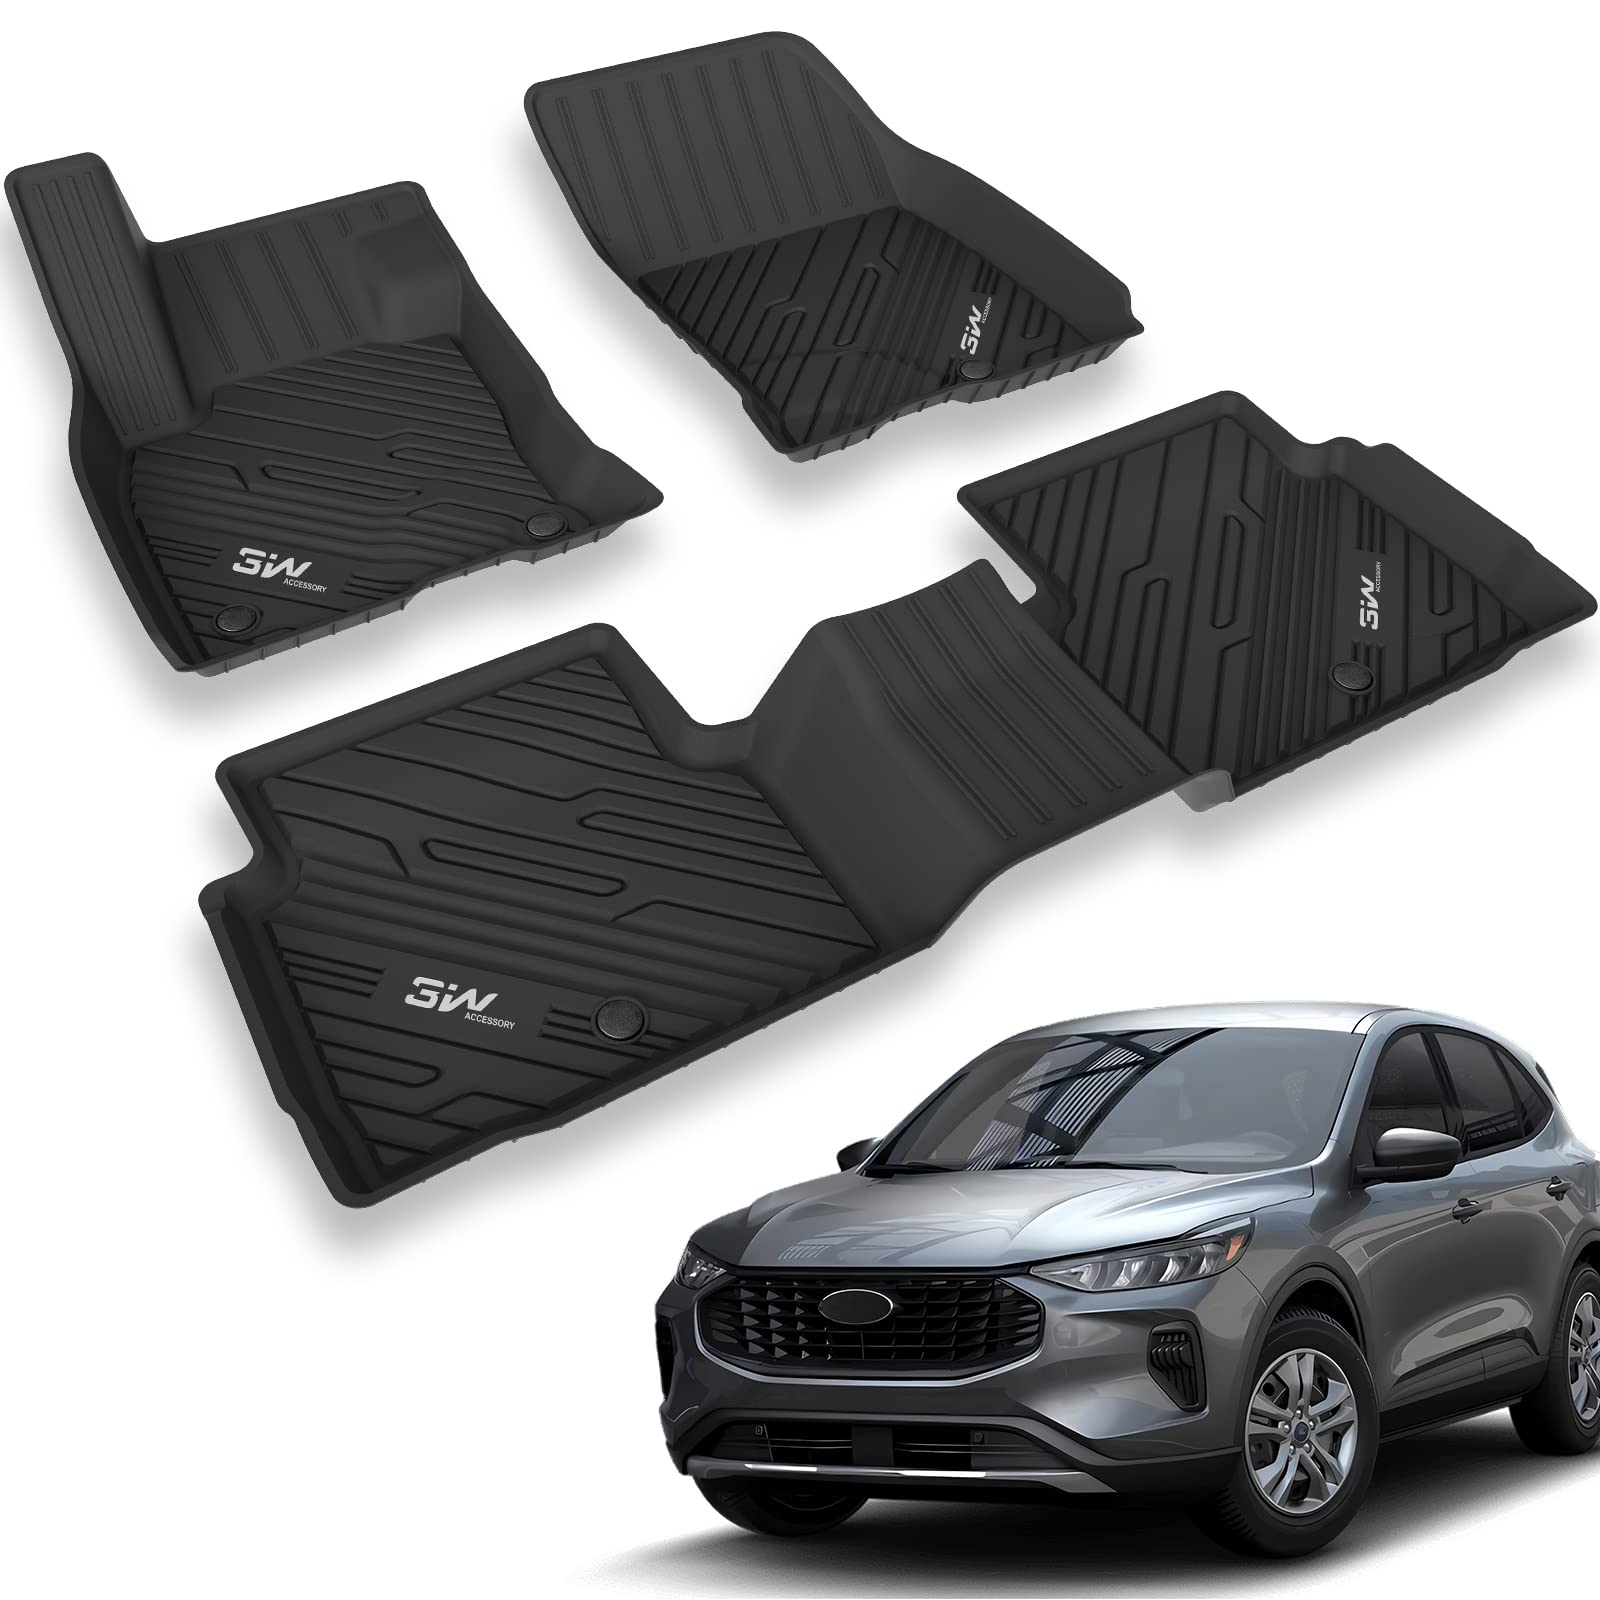 3W Ford Escape 2020-2023 (NOT for Hybrid) Custom Floor Mats TPE Material & All-Weather Protection Vehicles & Parts 3Wliners   